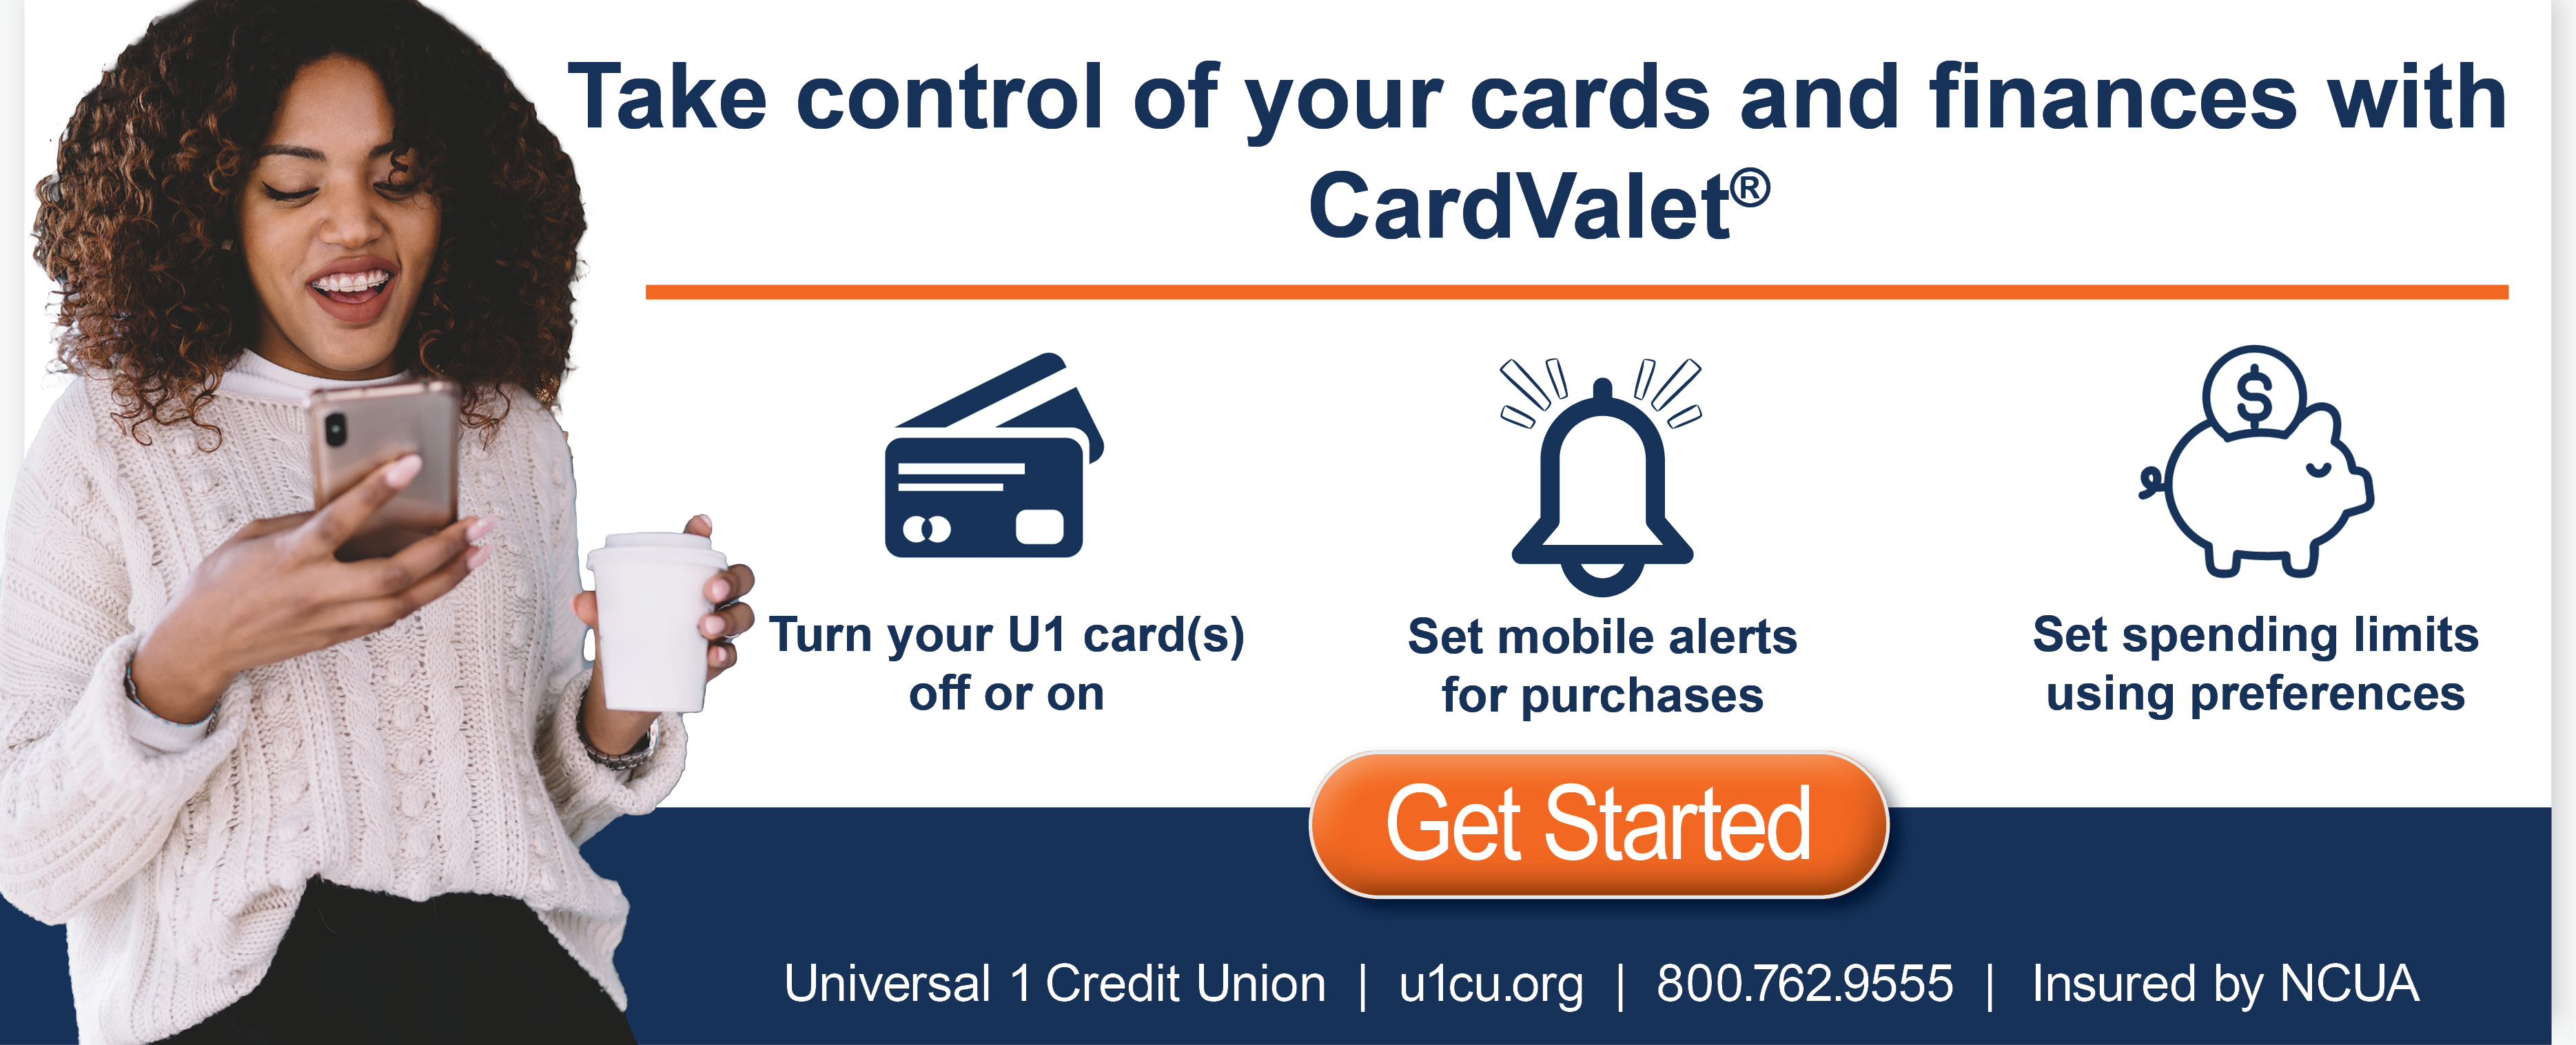 Take control of your cards and finances with CardValet